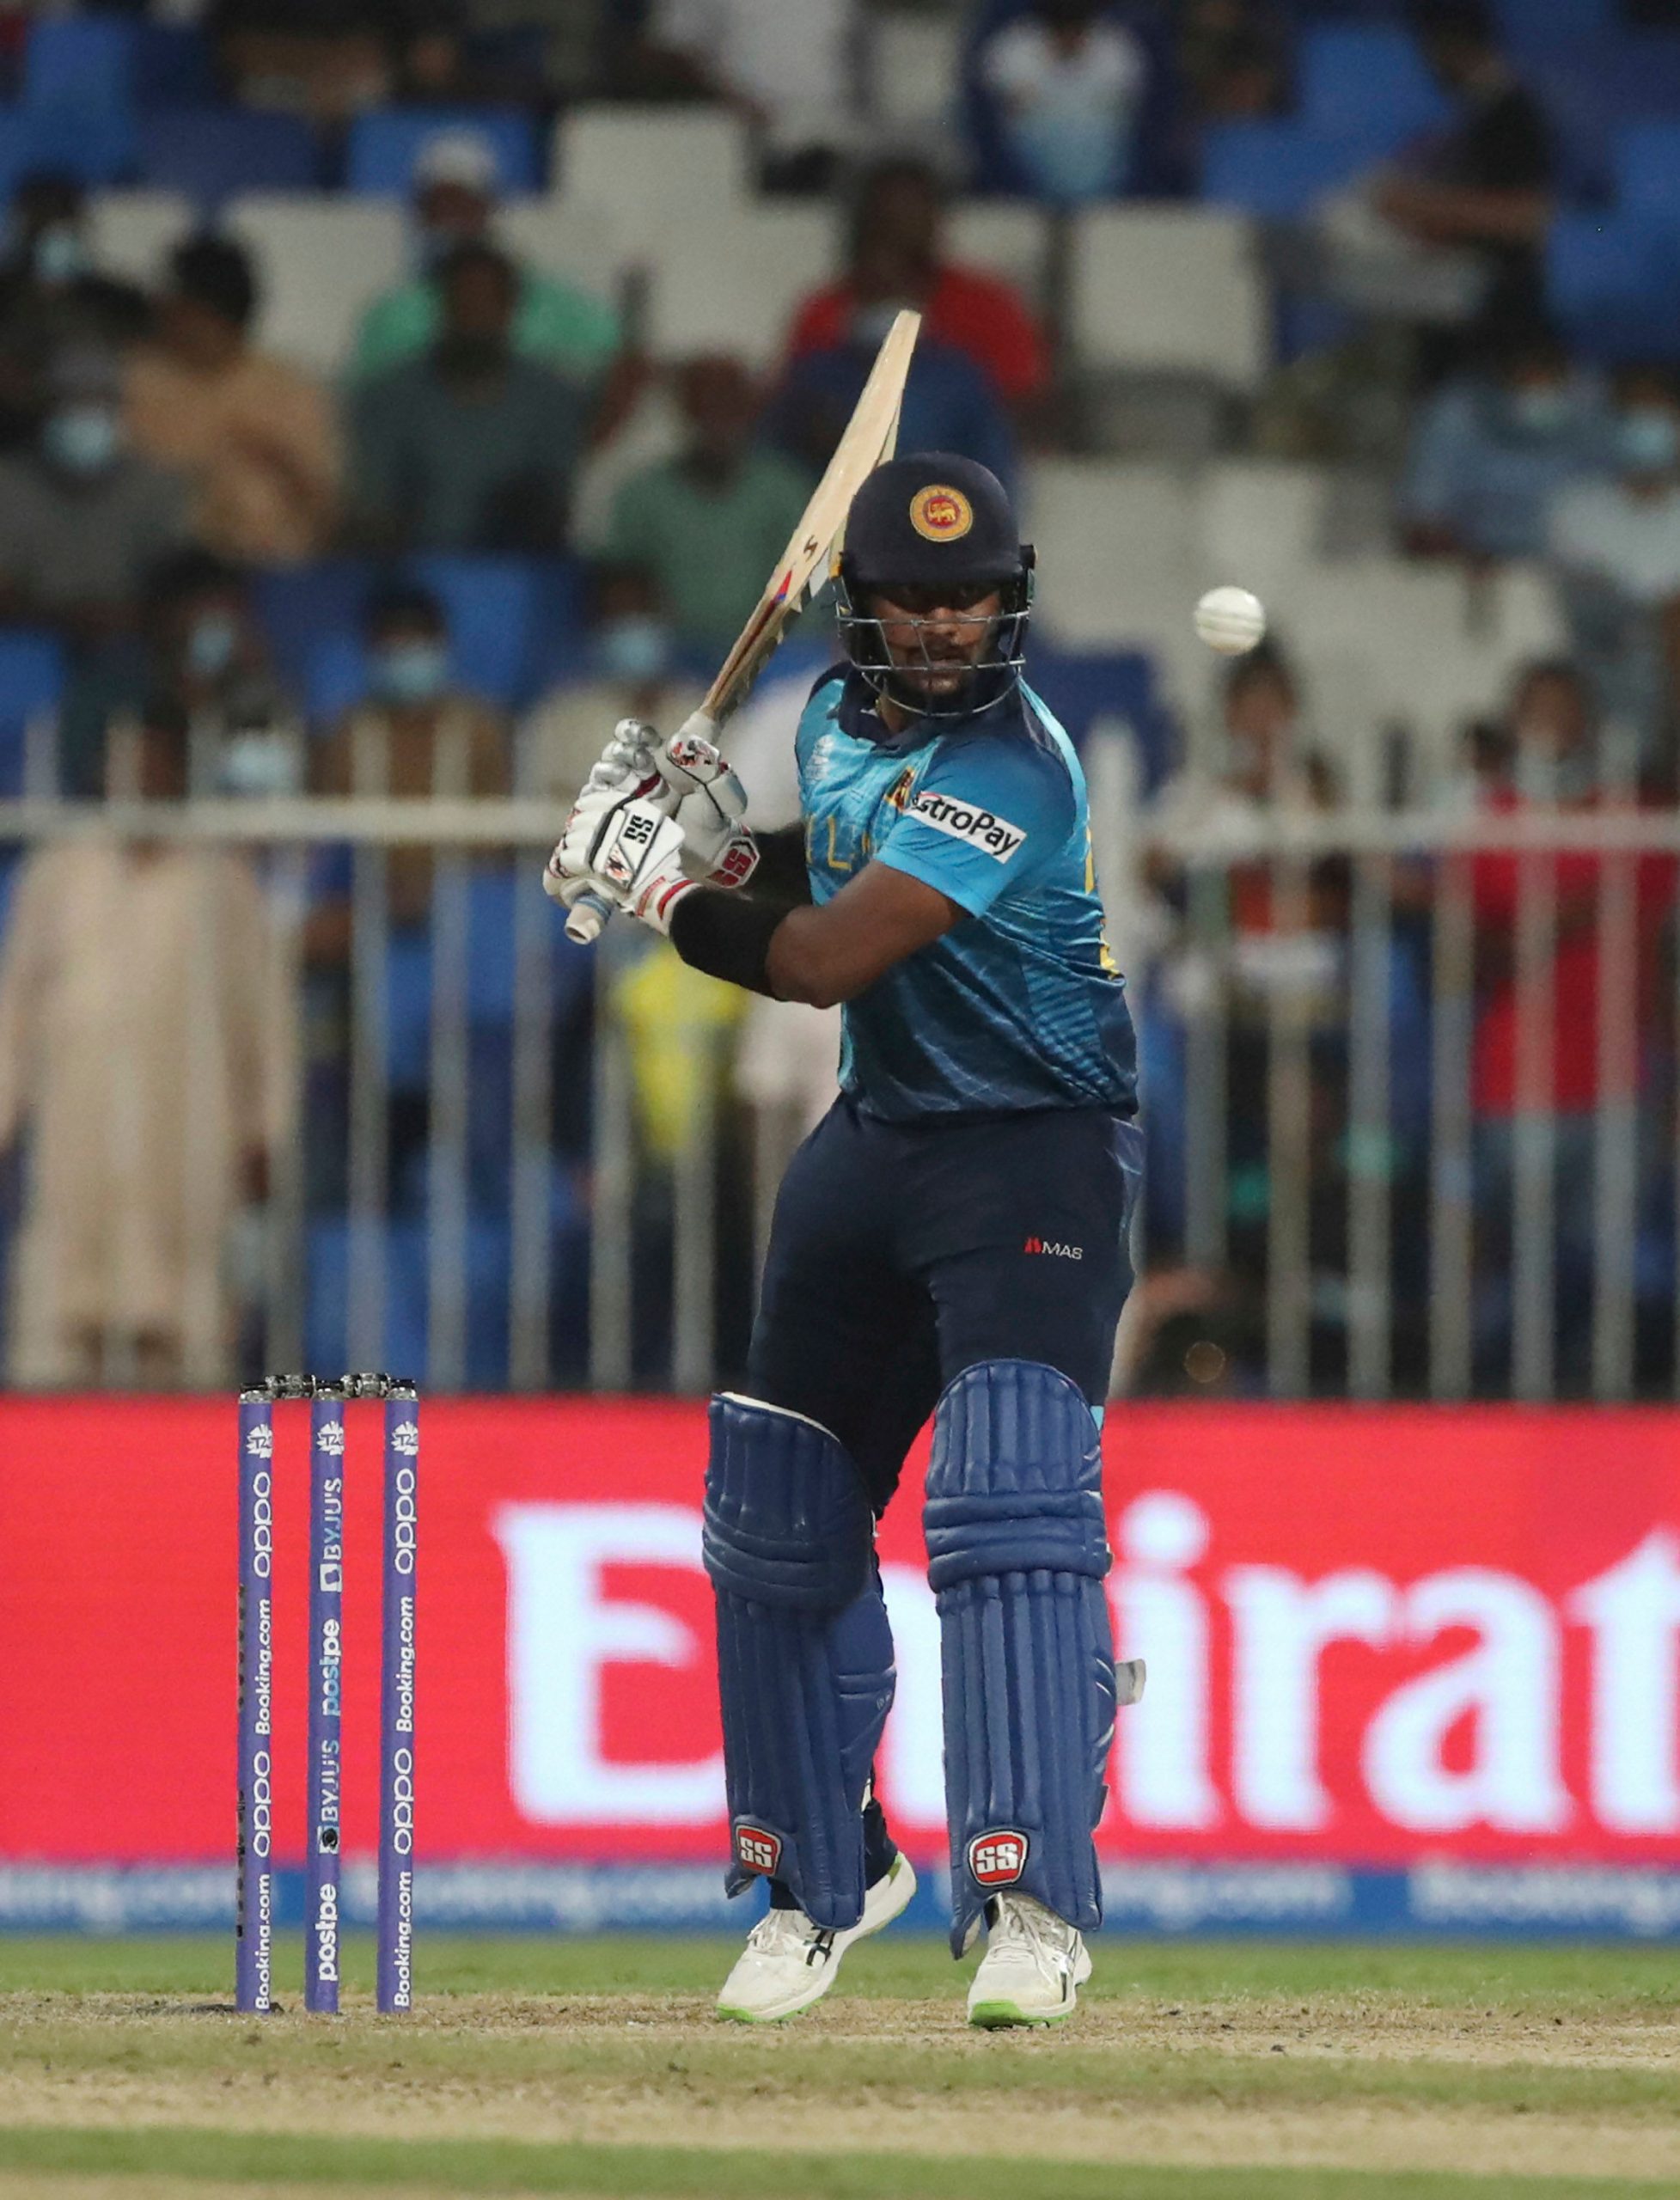 T20 World Cup, Sri Lanka vs Bangladesh: When and where to watch live streaming, telecast